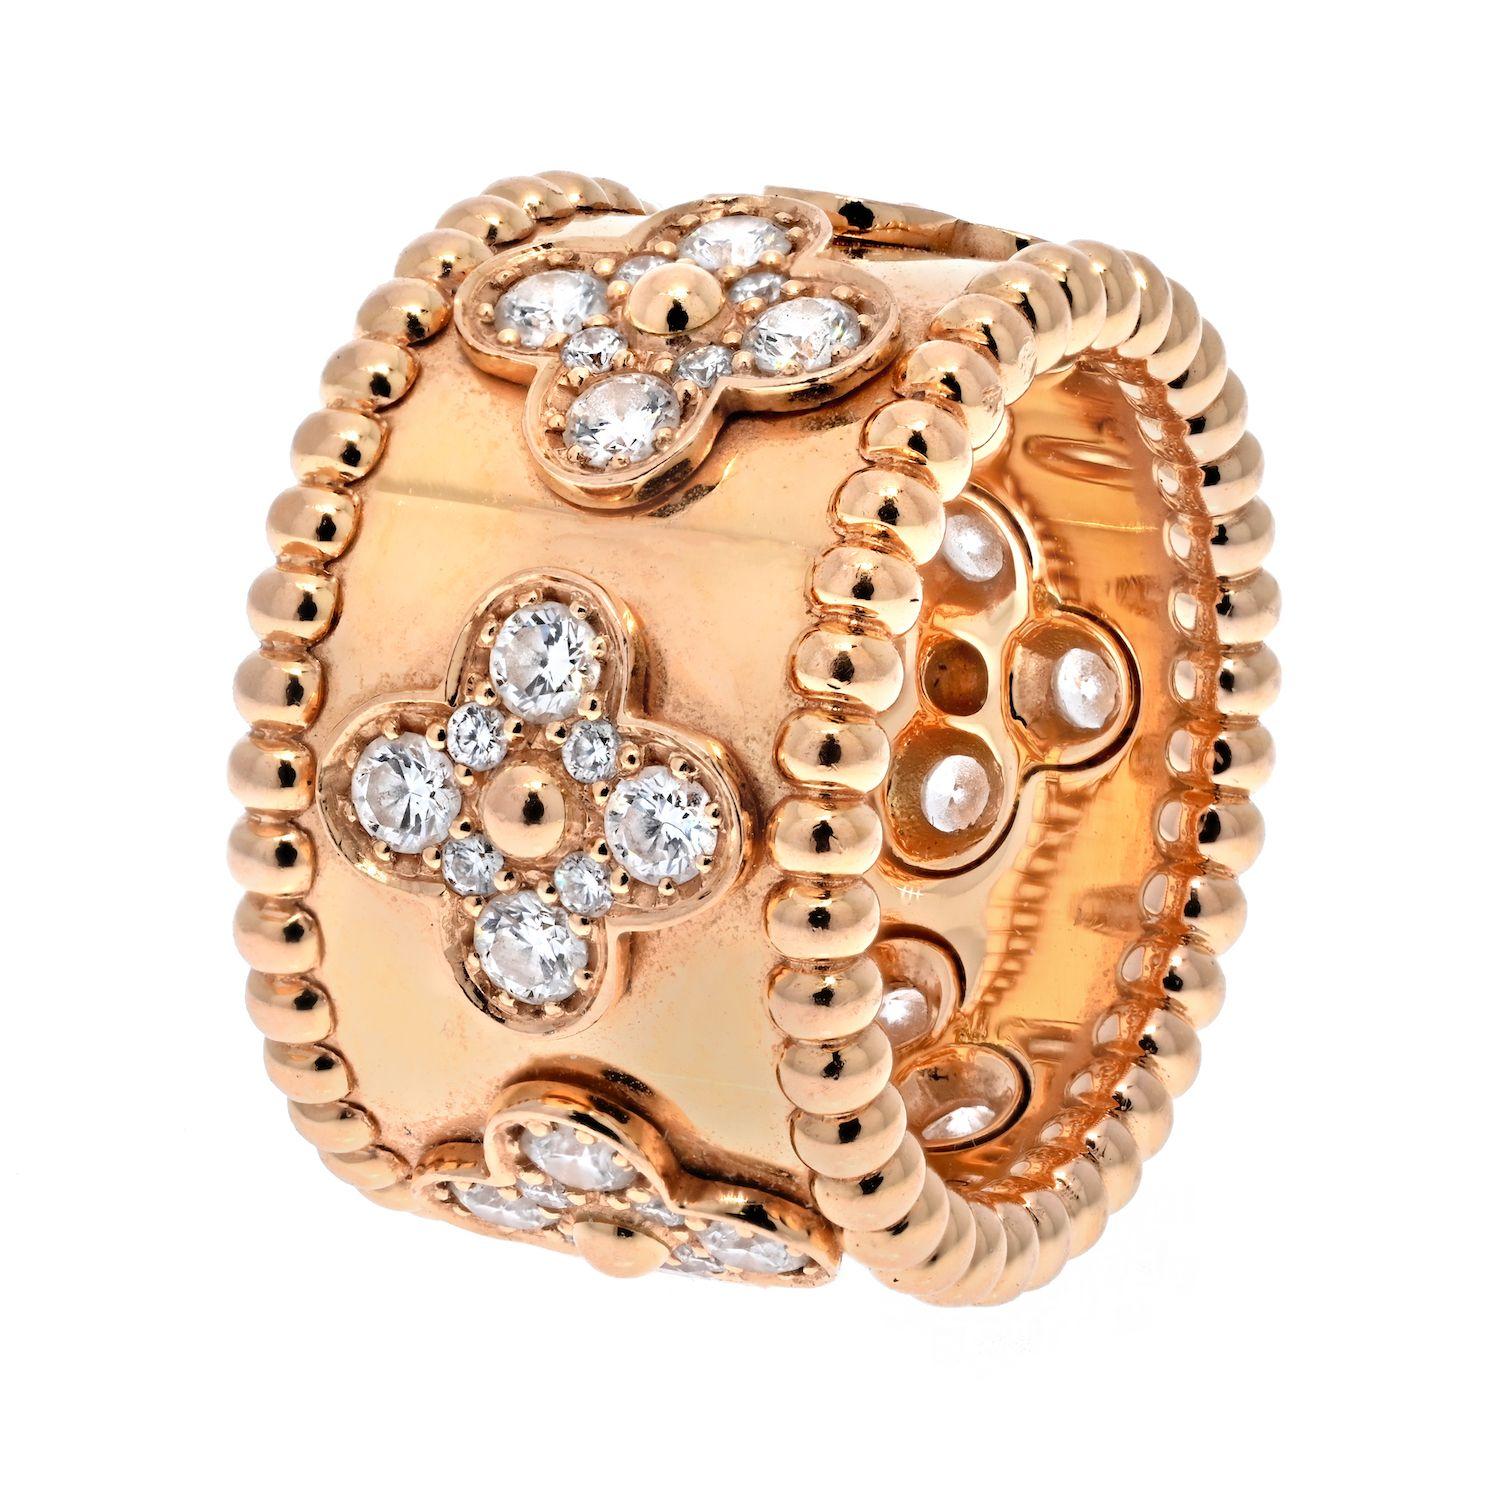 Van Cleef & Arpels 18K Yellow Gold Perlee Clover Diamond Ring.

Superb and rare Van Cleef & Arpels Perlée Trèfle large model ring in yellow gold diamonds, composed of one significant smooth sleeve in yellow gold, decorated with 6 very beautiful